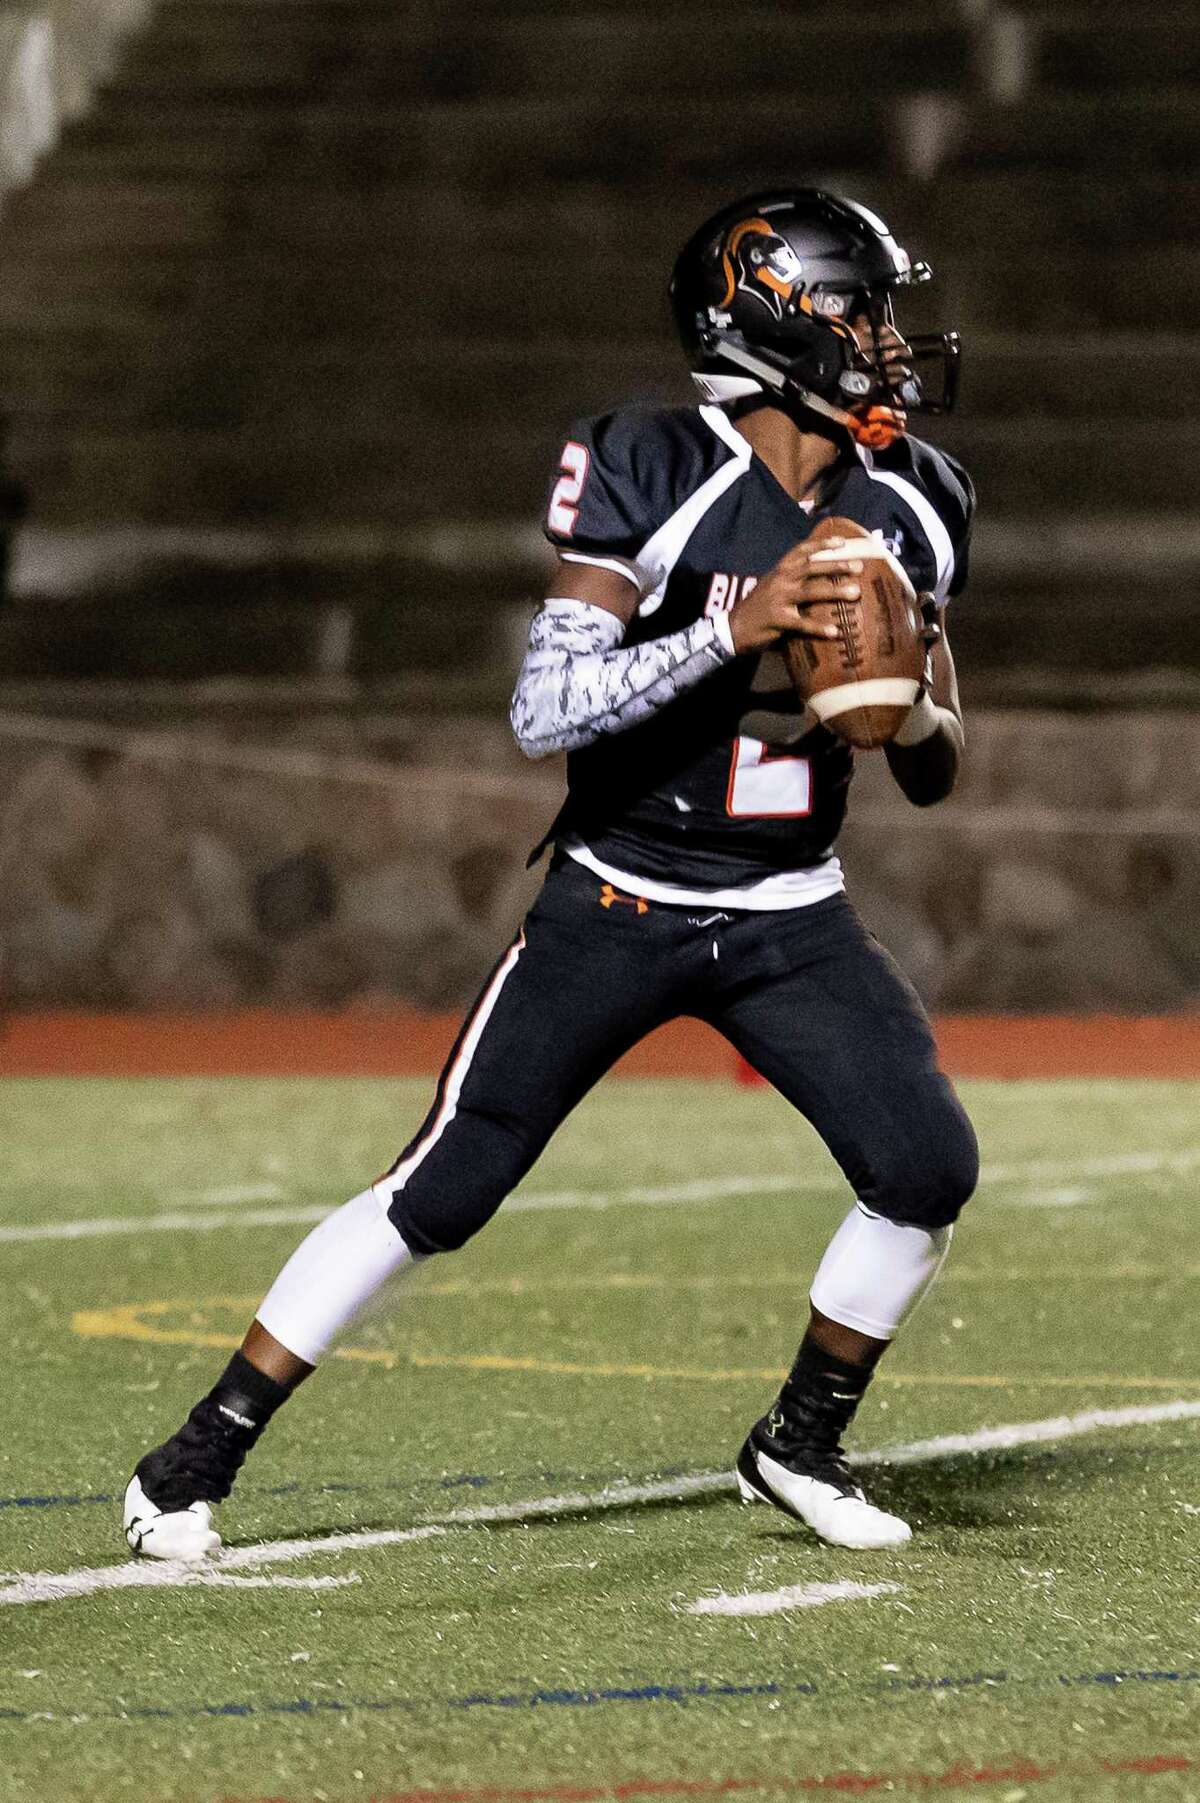 Stamford quarterback Terry Forrester looks to make a pass against Westhill on Nov. 21. Later that night, Forrester was rushed to the hospital after a cardiac event. He is now recovering well from open-heart surgery.